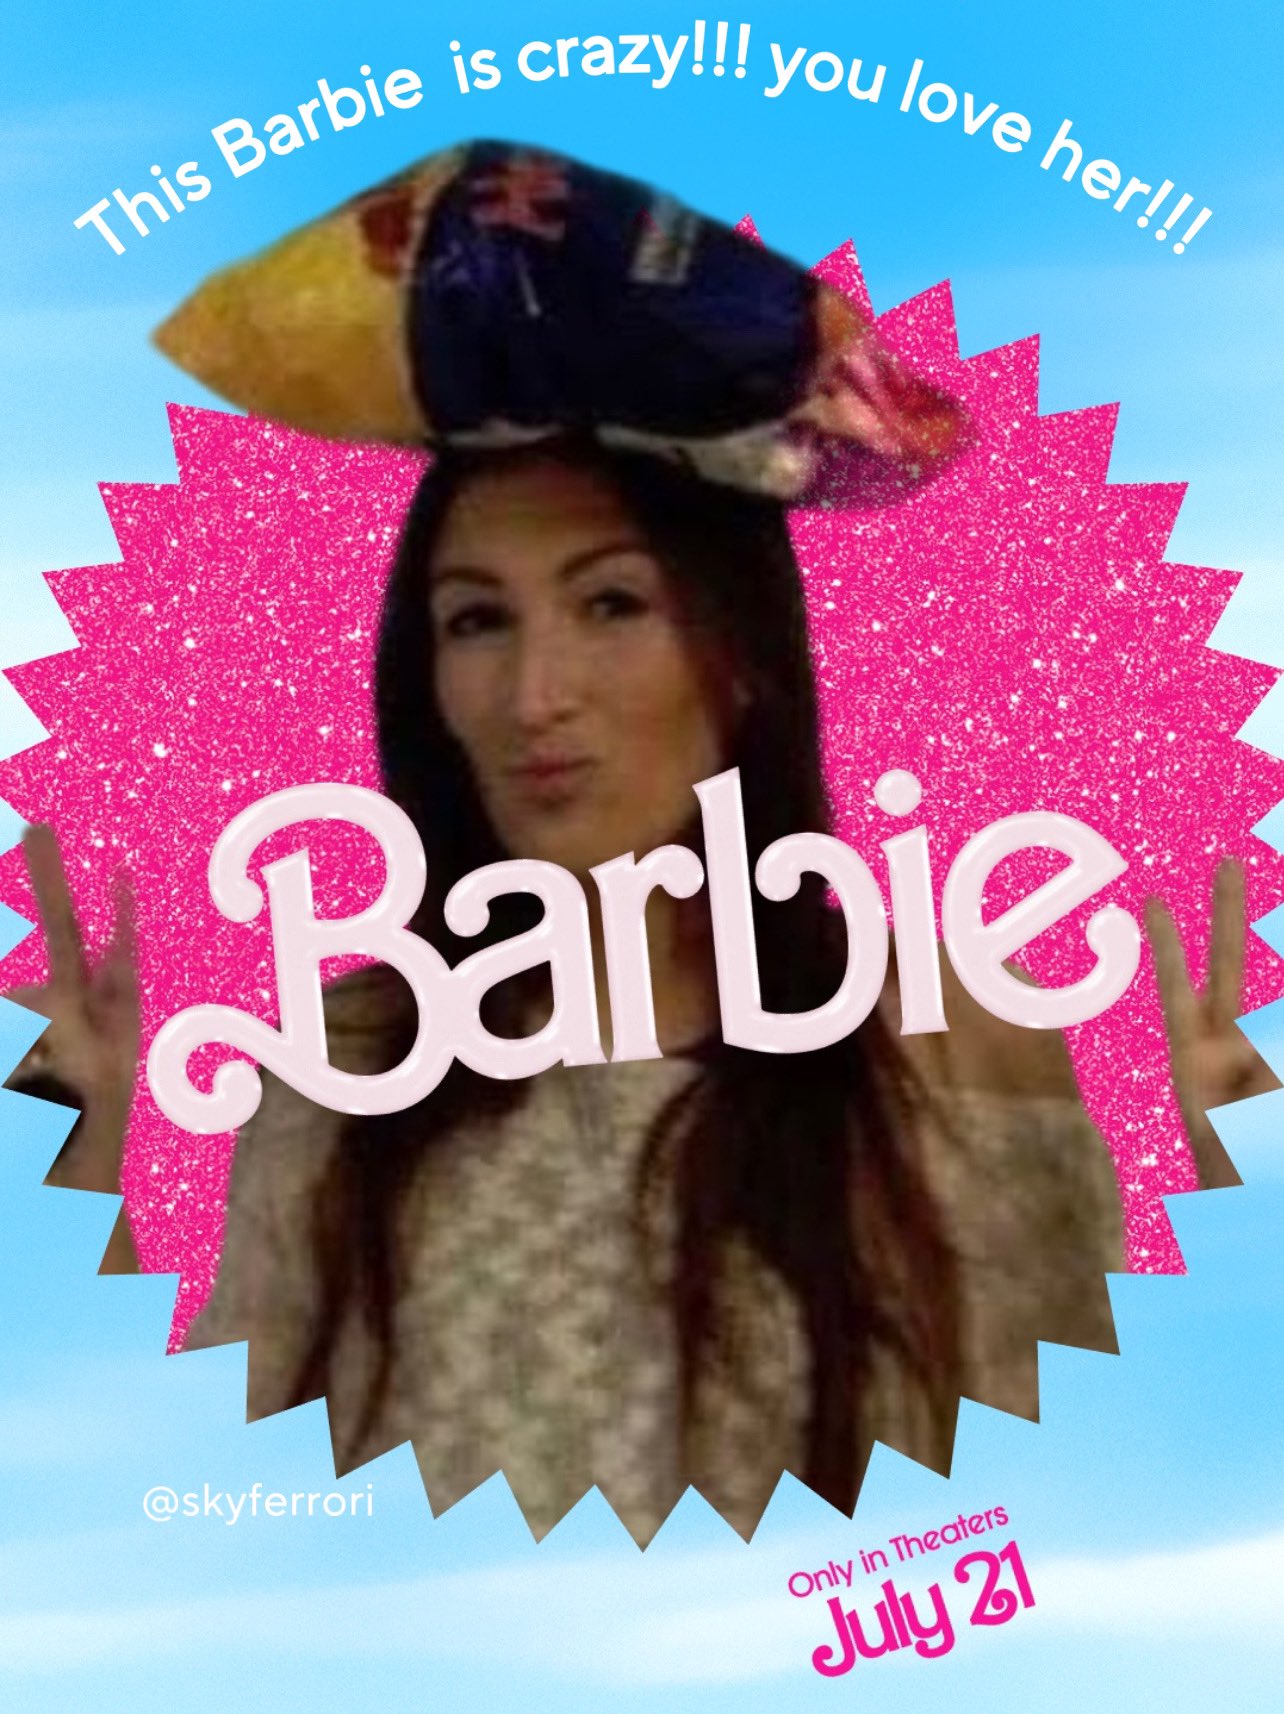 This Barbie is crazy!!! you love her!!! Barbie Only in Theaters July 21